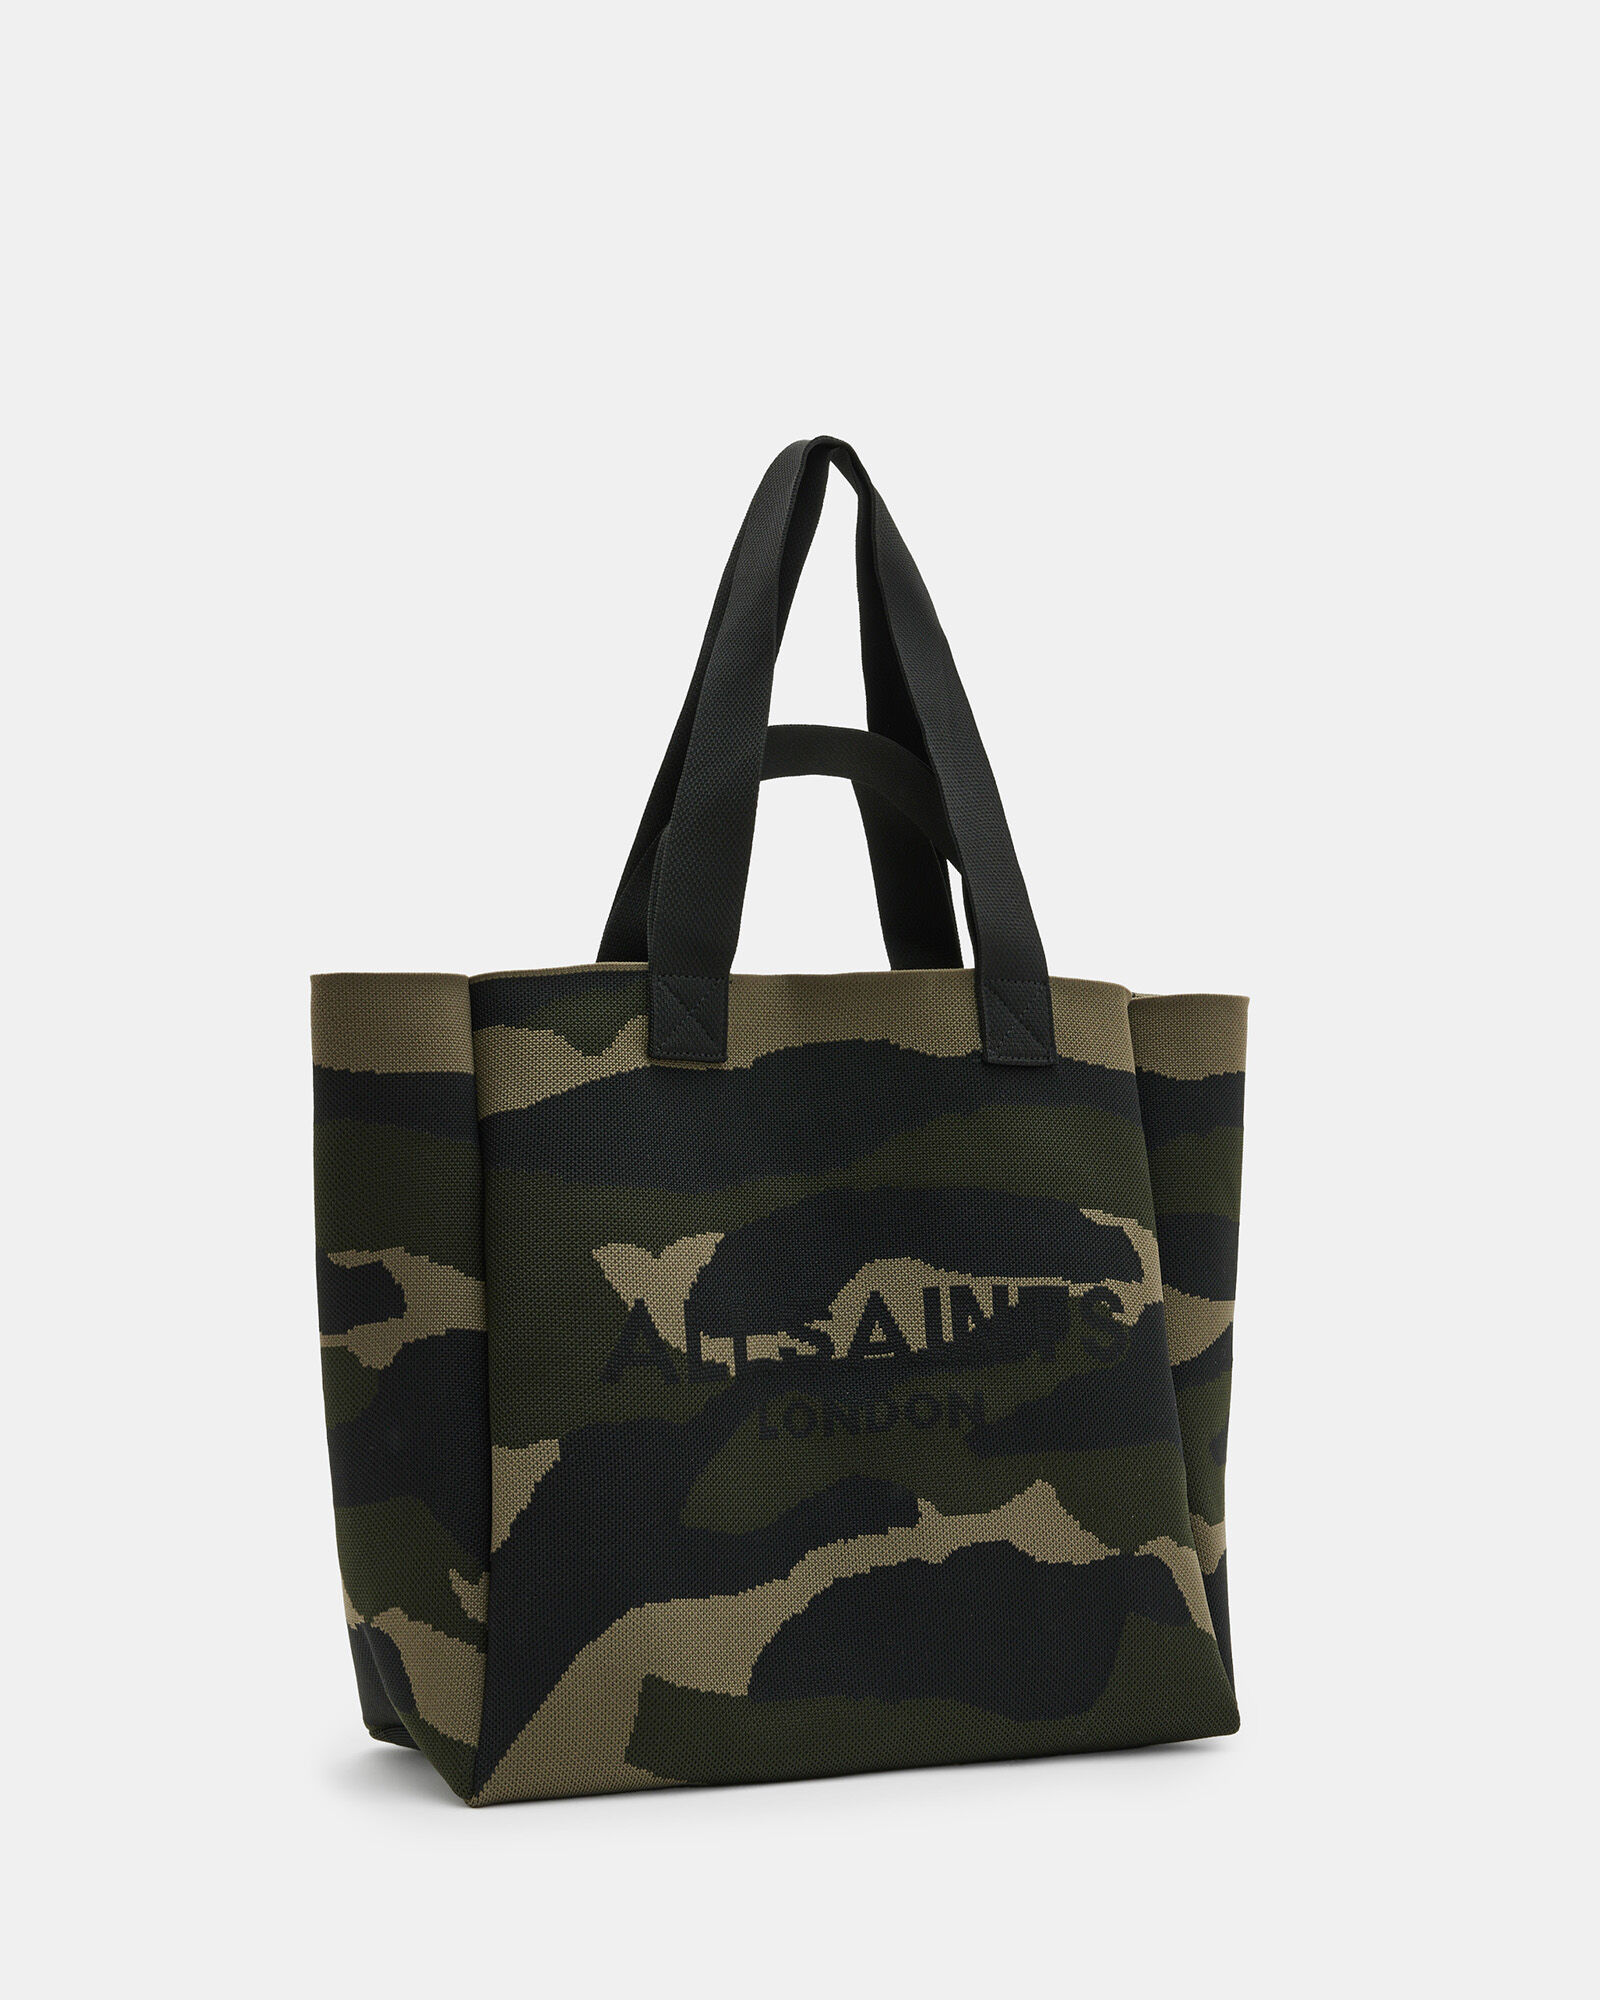 Gold and Black Camouflage Bag/purse - Etsy